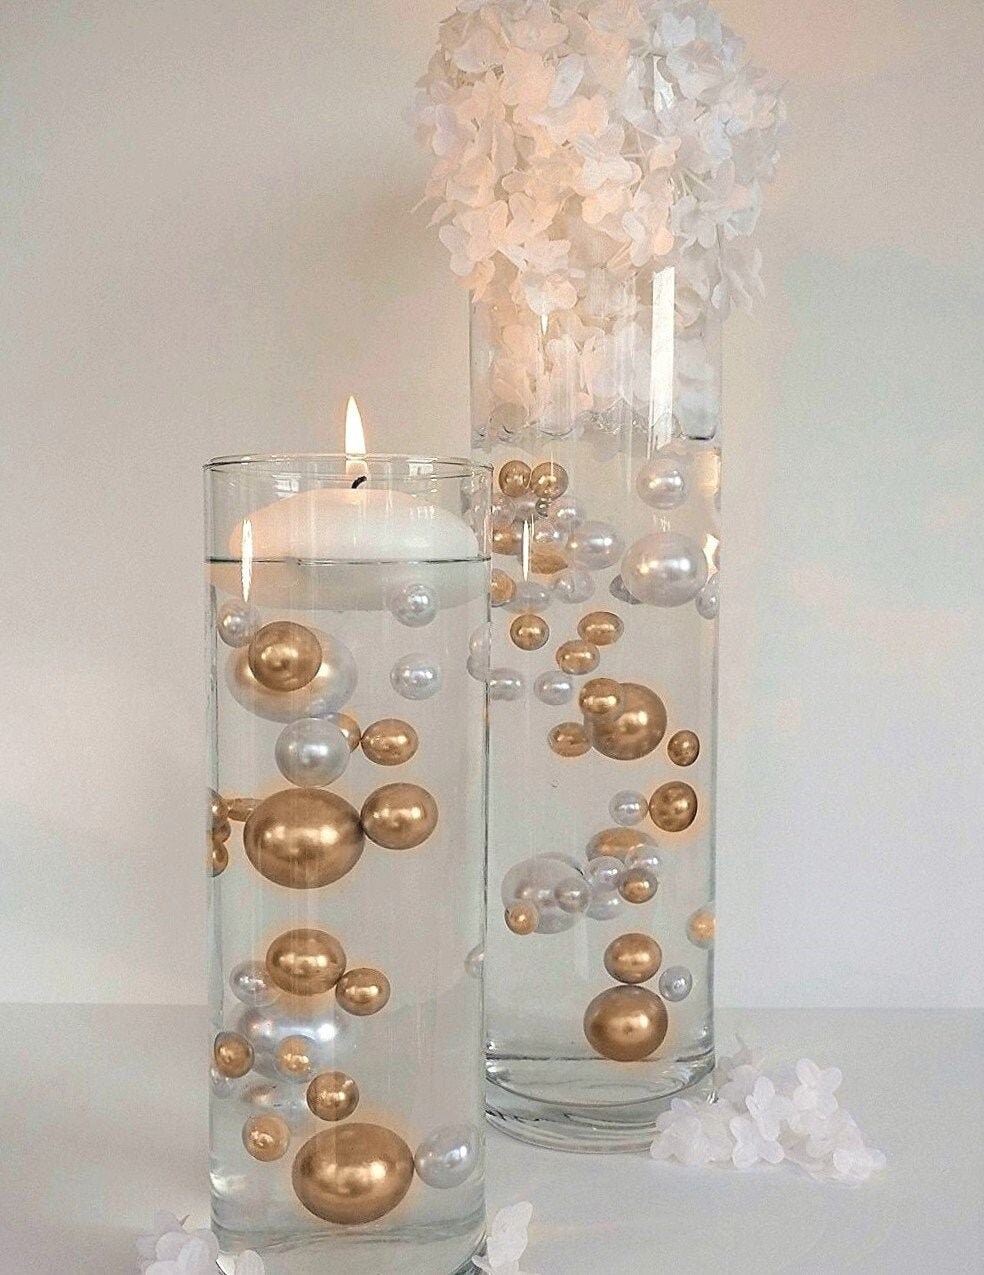 60 x Jumbo Water Beads Wedding Centrepiece Vases Party Table Decor and Displays 